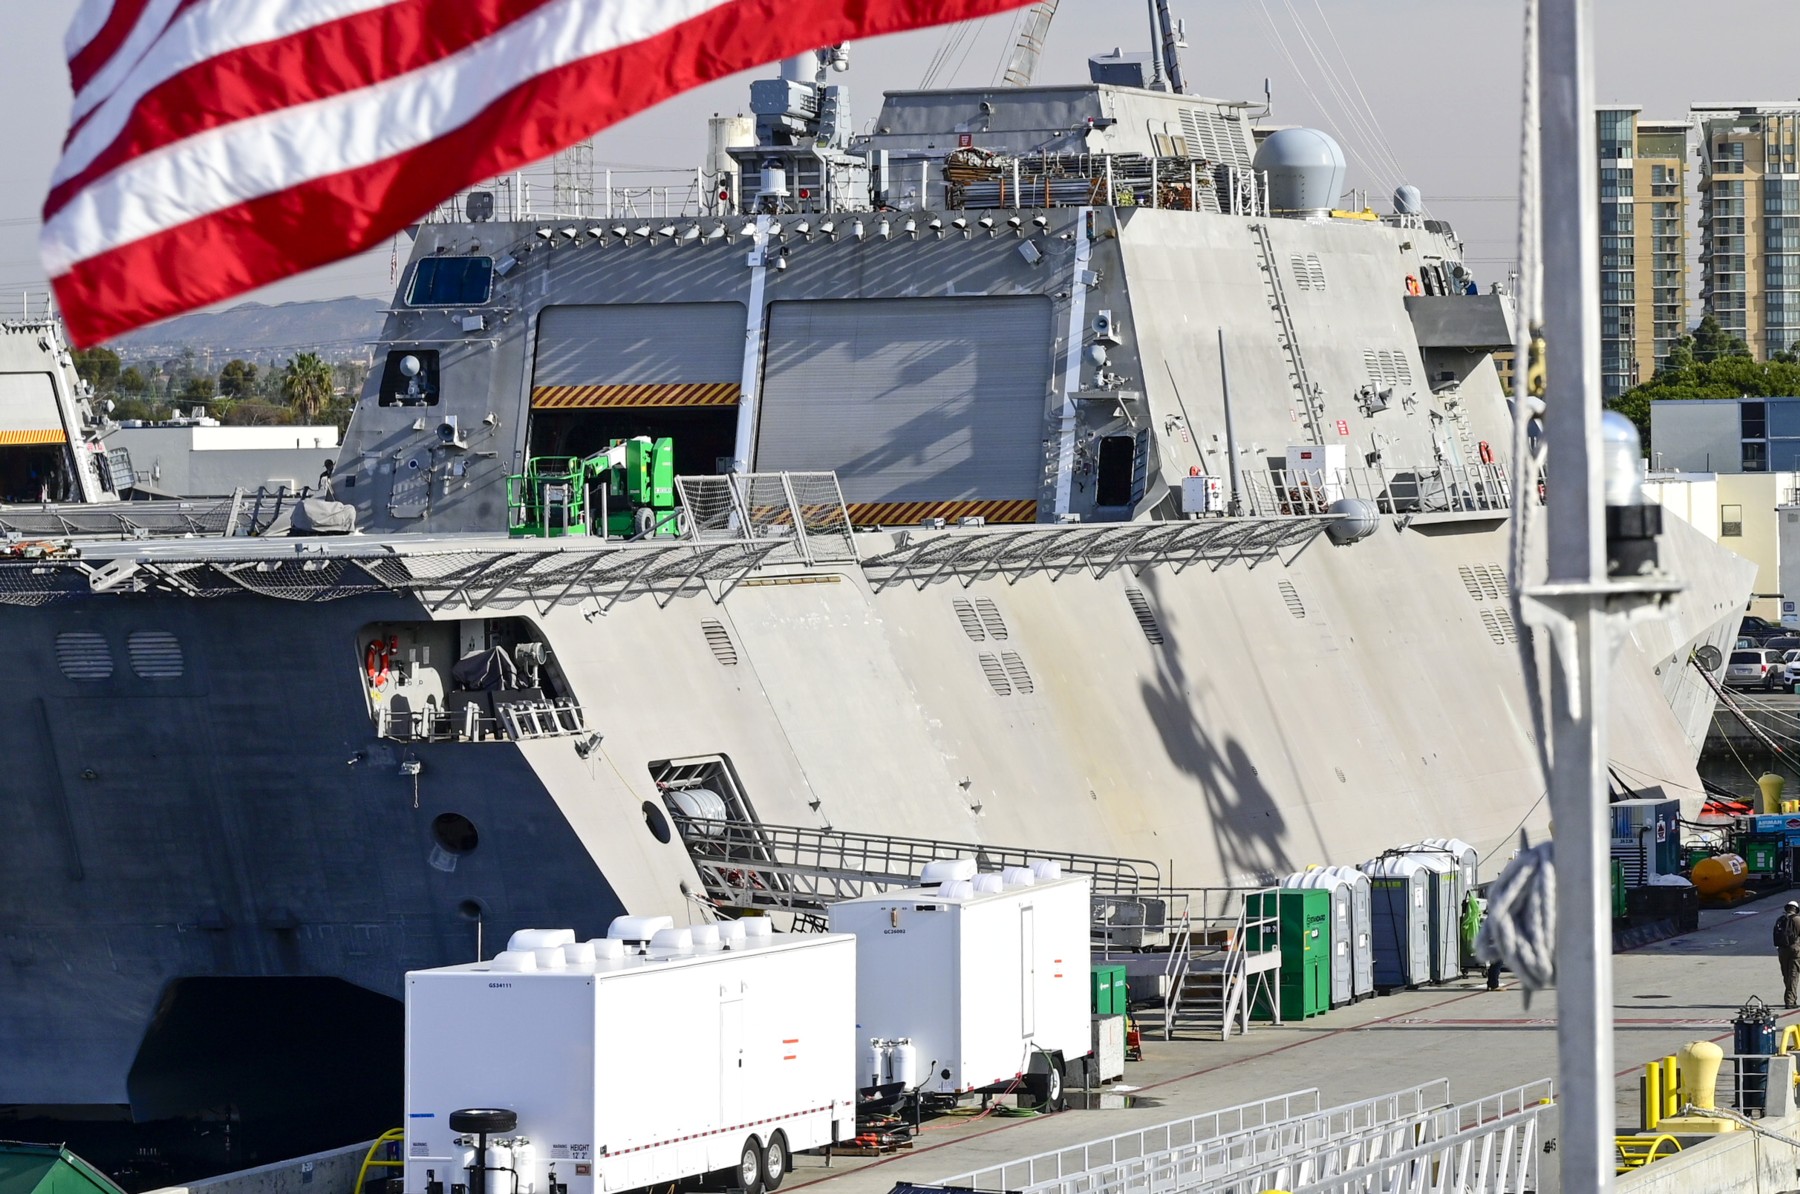 lcs-30 uss canberra littoral combat ship independence class us navy naval base san diego california 11